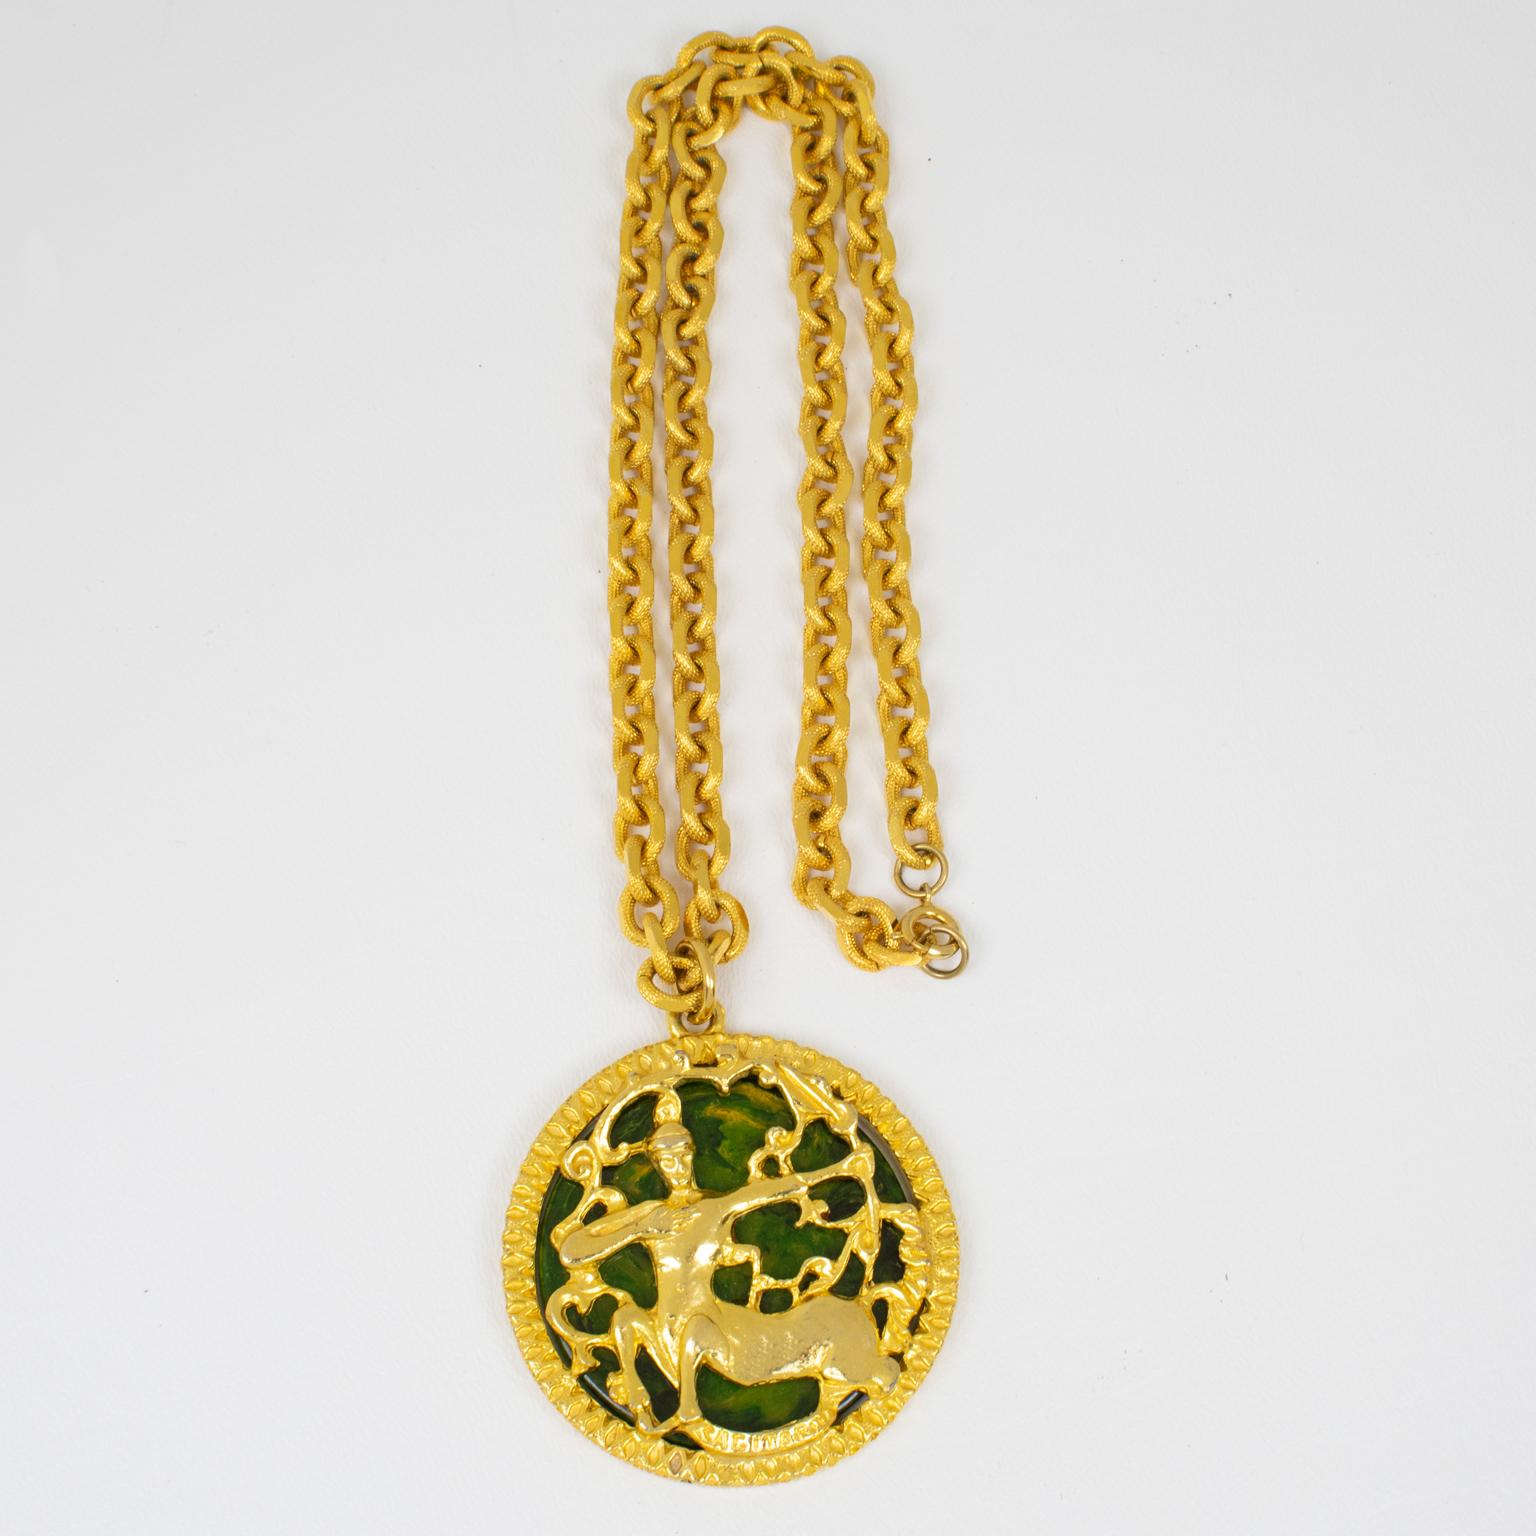 Women's Pauline Rader Gilt Metal Necklace with Centaur Pendant and Green Bakelite, 1970s For Sale